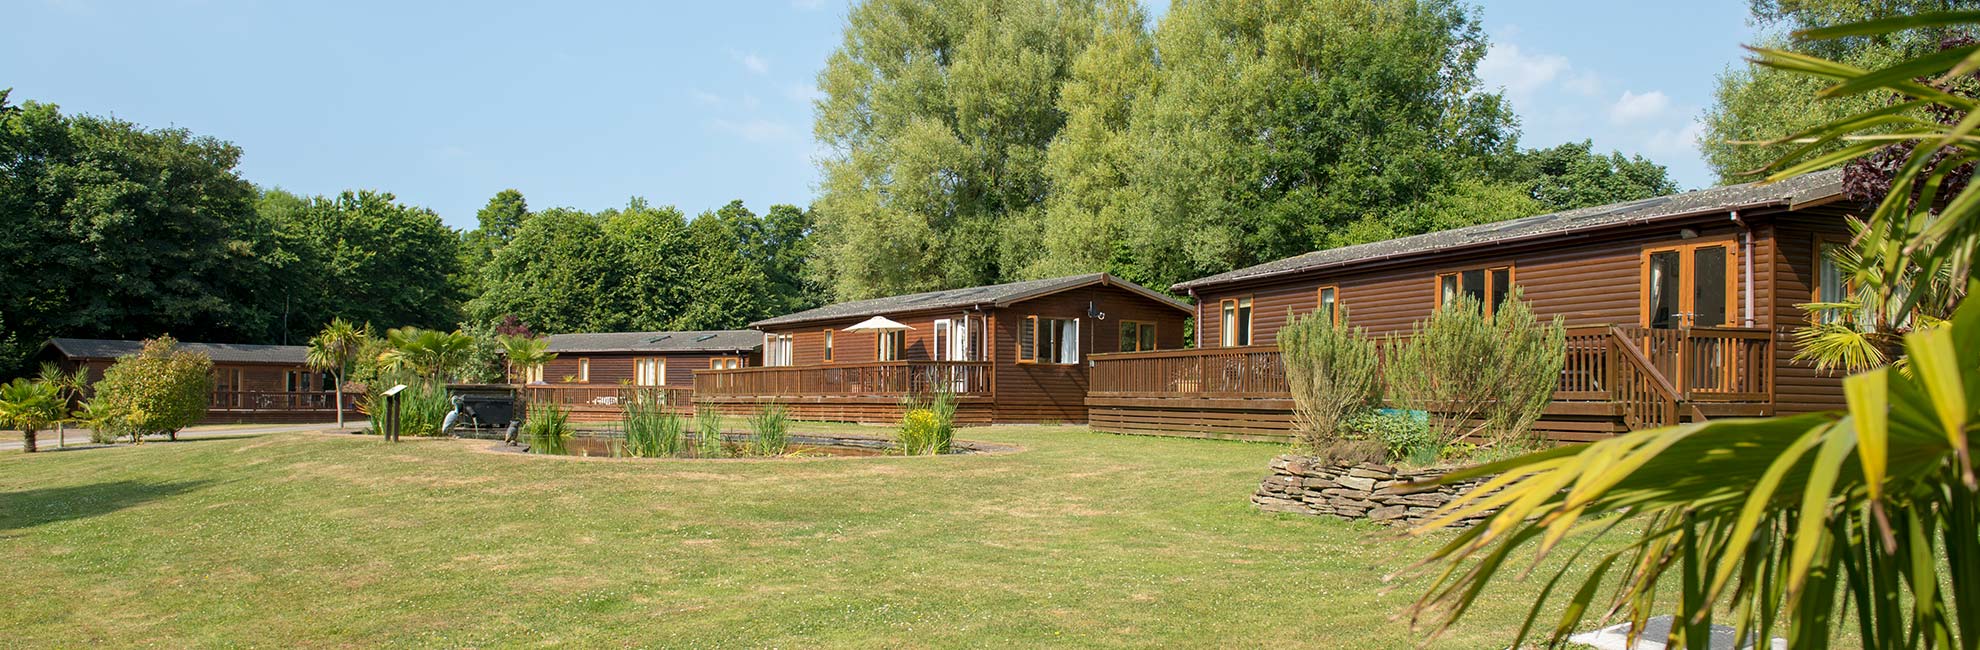 Wooden lodges at St. Minver Holiday Park